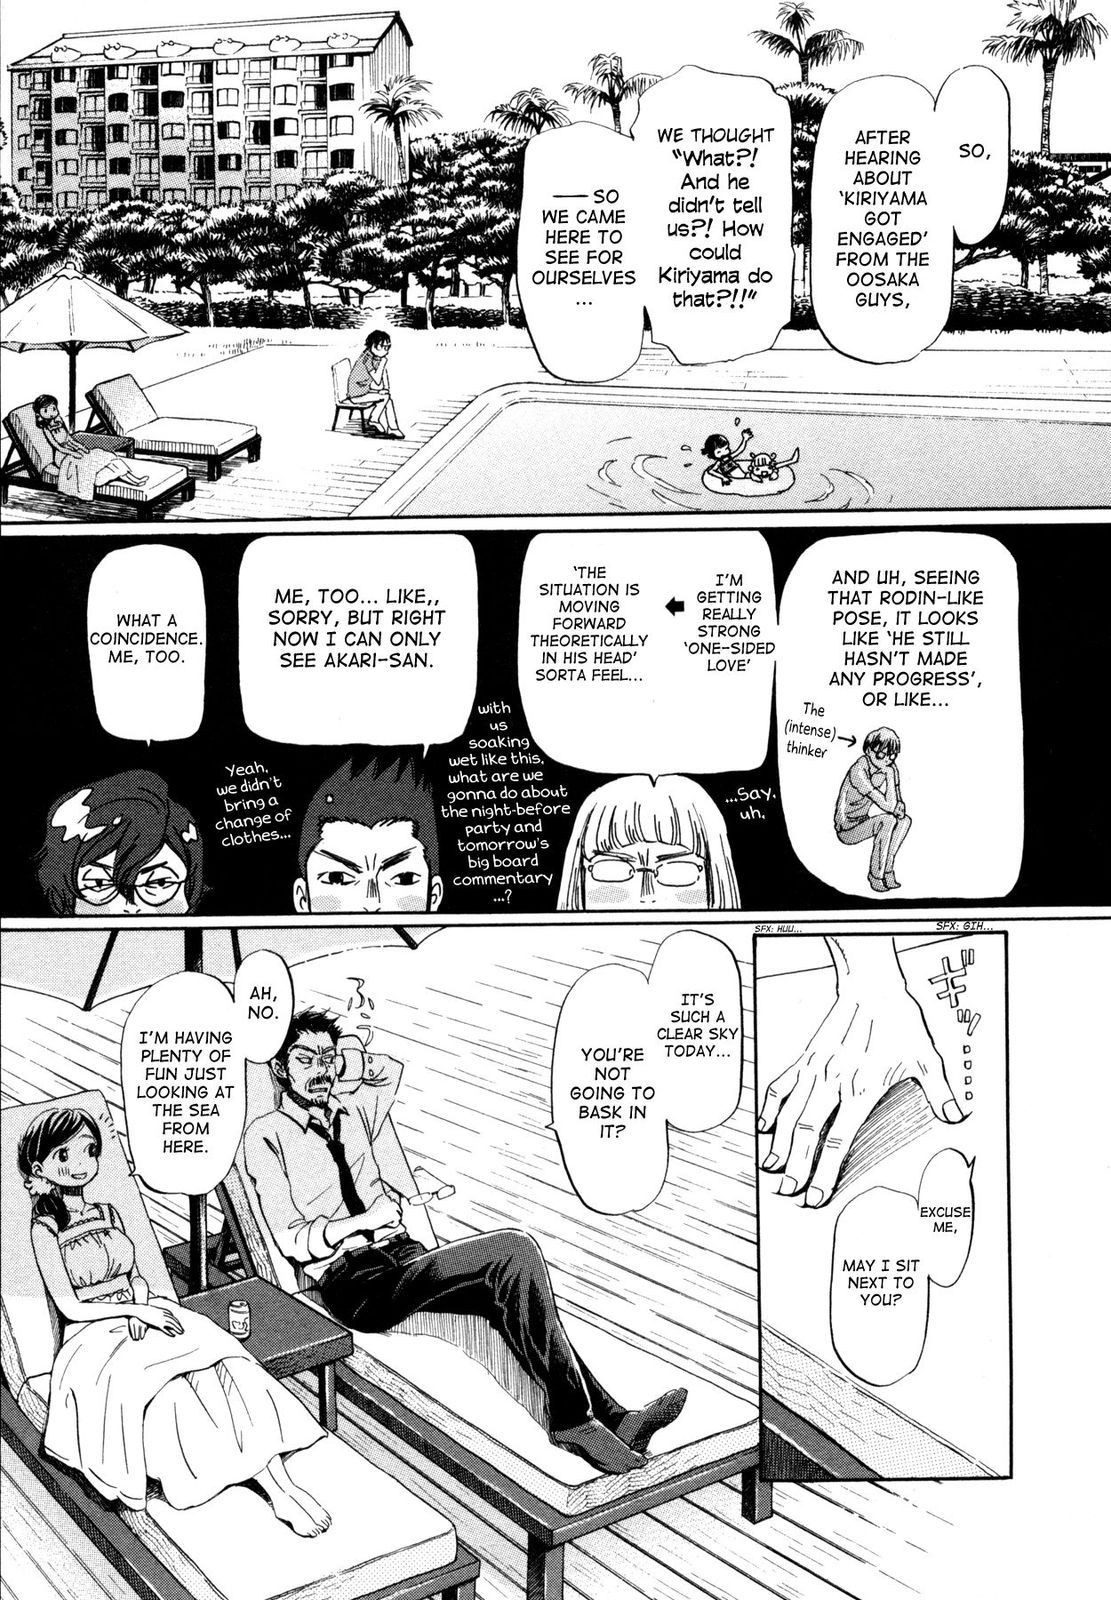 March Comes in Like a Lion, Chapter 118 The Satsuma Arc (Part 2) (EN) image 05